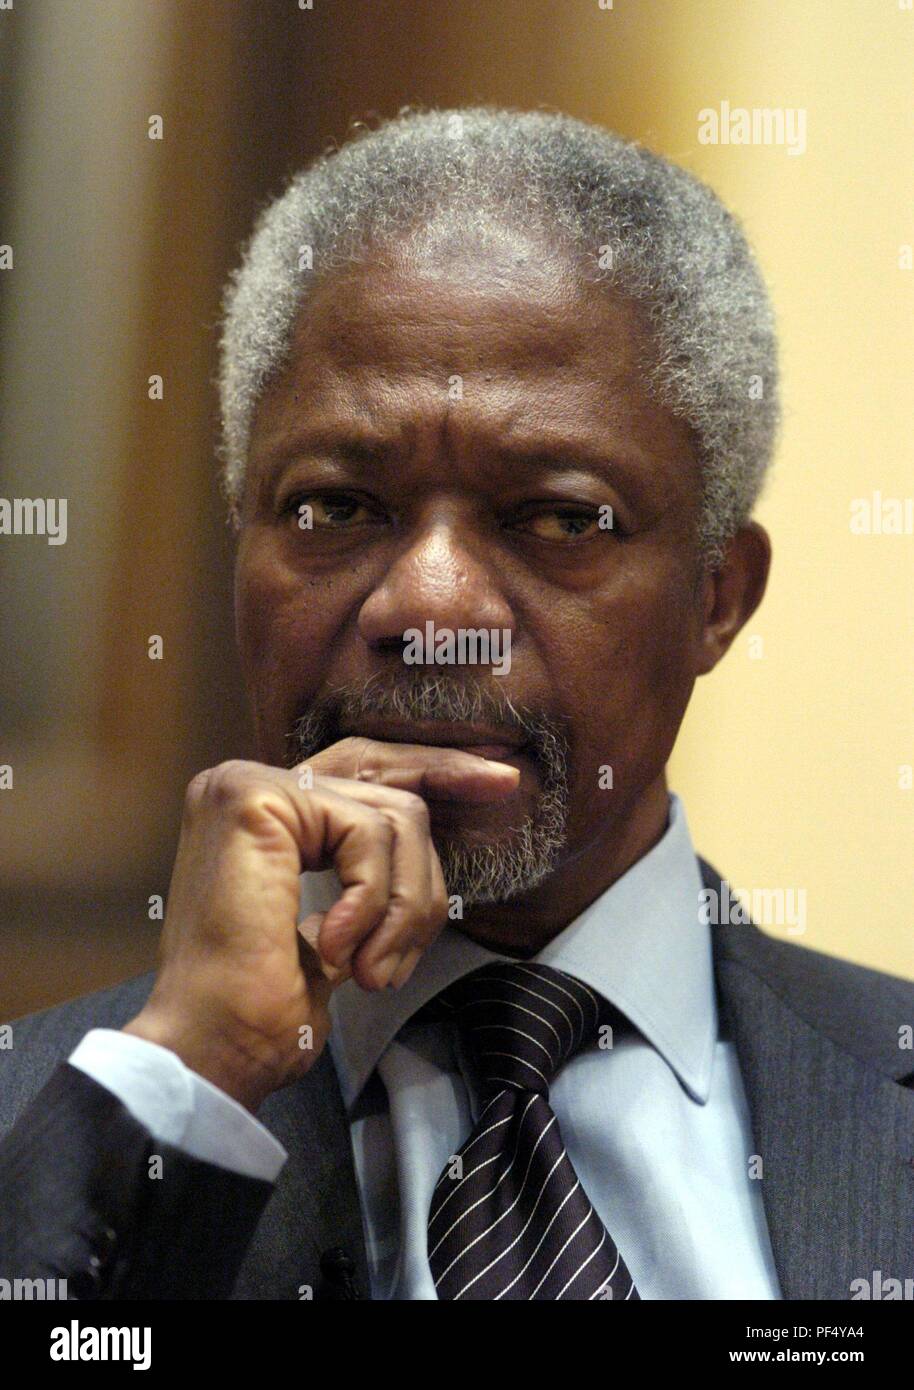 Tuebingen, Germany. 12th Dec, 2003. (dpa) - UN Secretary-General Kofi Annan pictured at the Eberhard-Karls-University in Tuebingen, Germany, 12 December 2003. Peace Nobel Price laureate Annan called for more tolerance, solidarity and compassion speaking to hundreds of invited guests at the university. | usage worldwide Credit: dpa/Alamy Live News Stock Photo